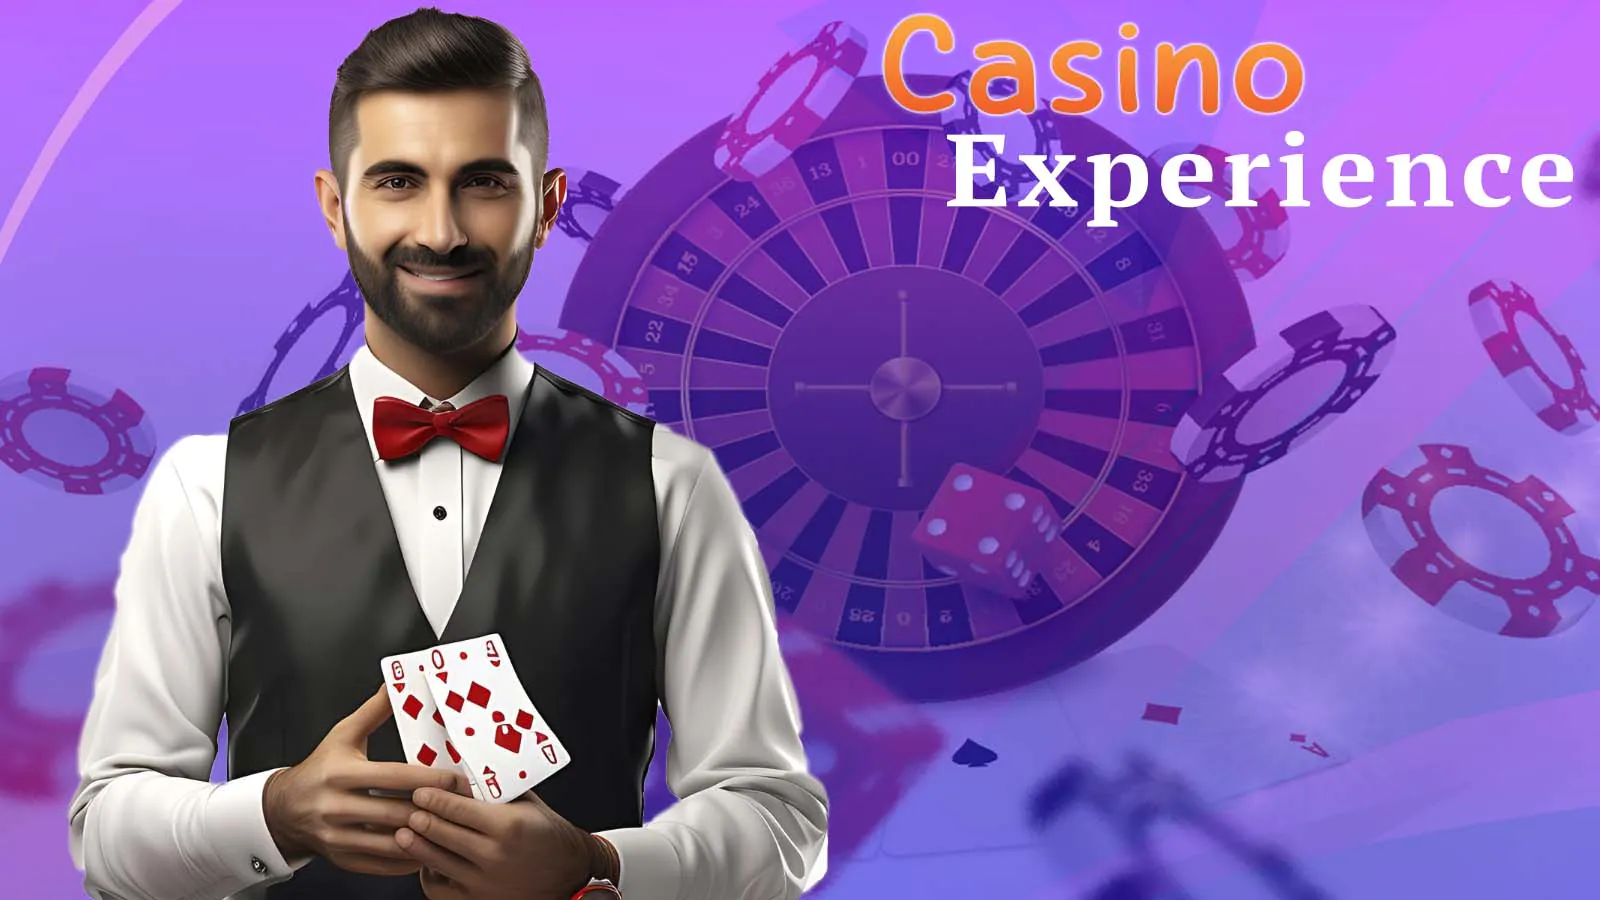 Experience the atmosphere of a real land-based gambling establishment